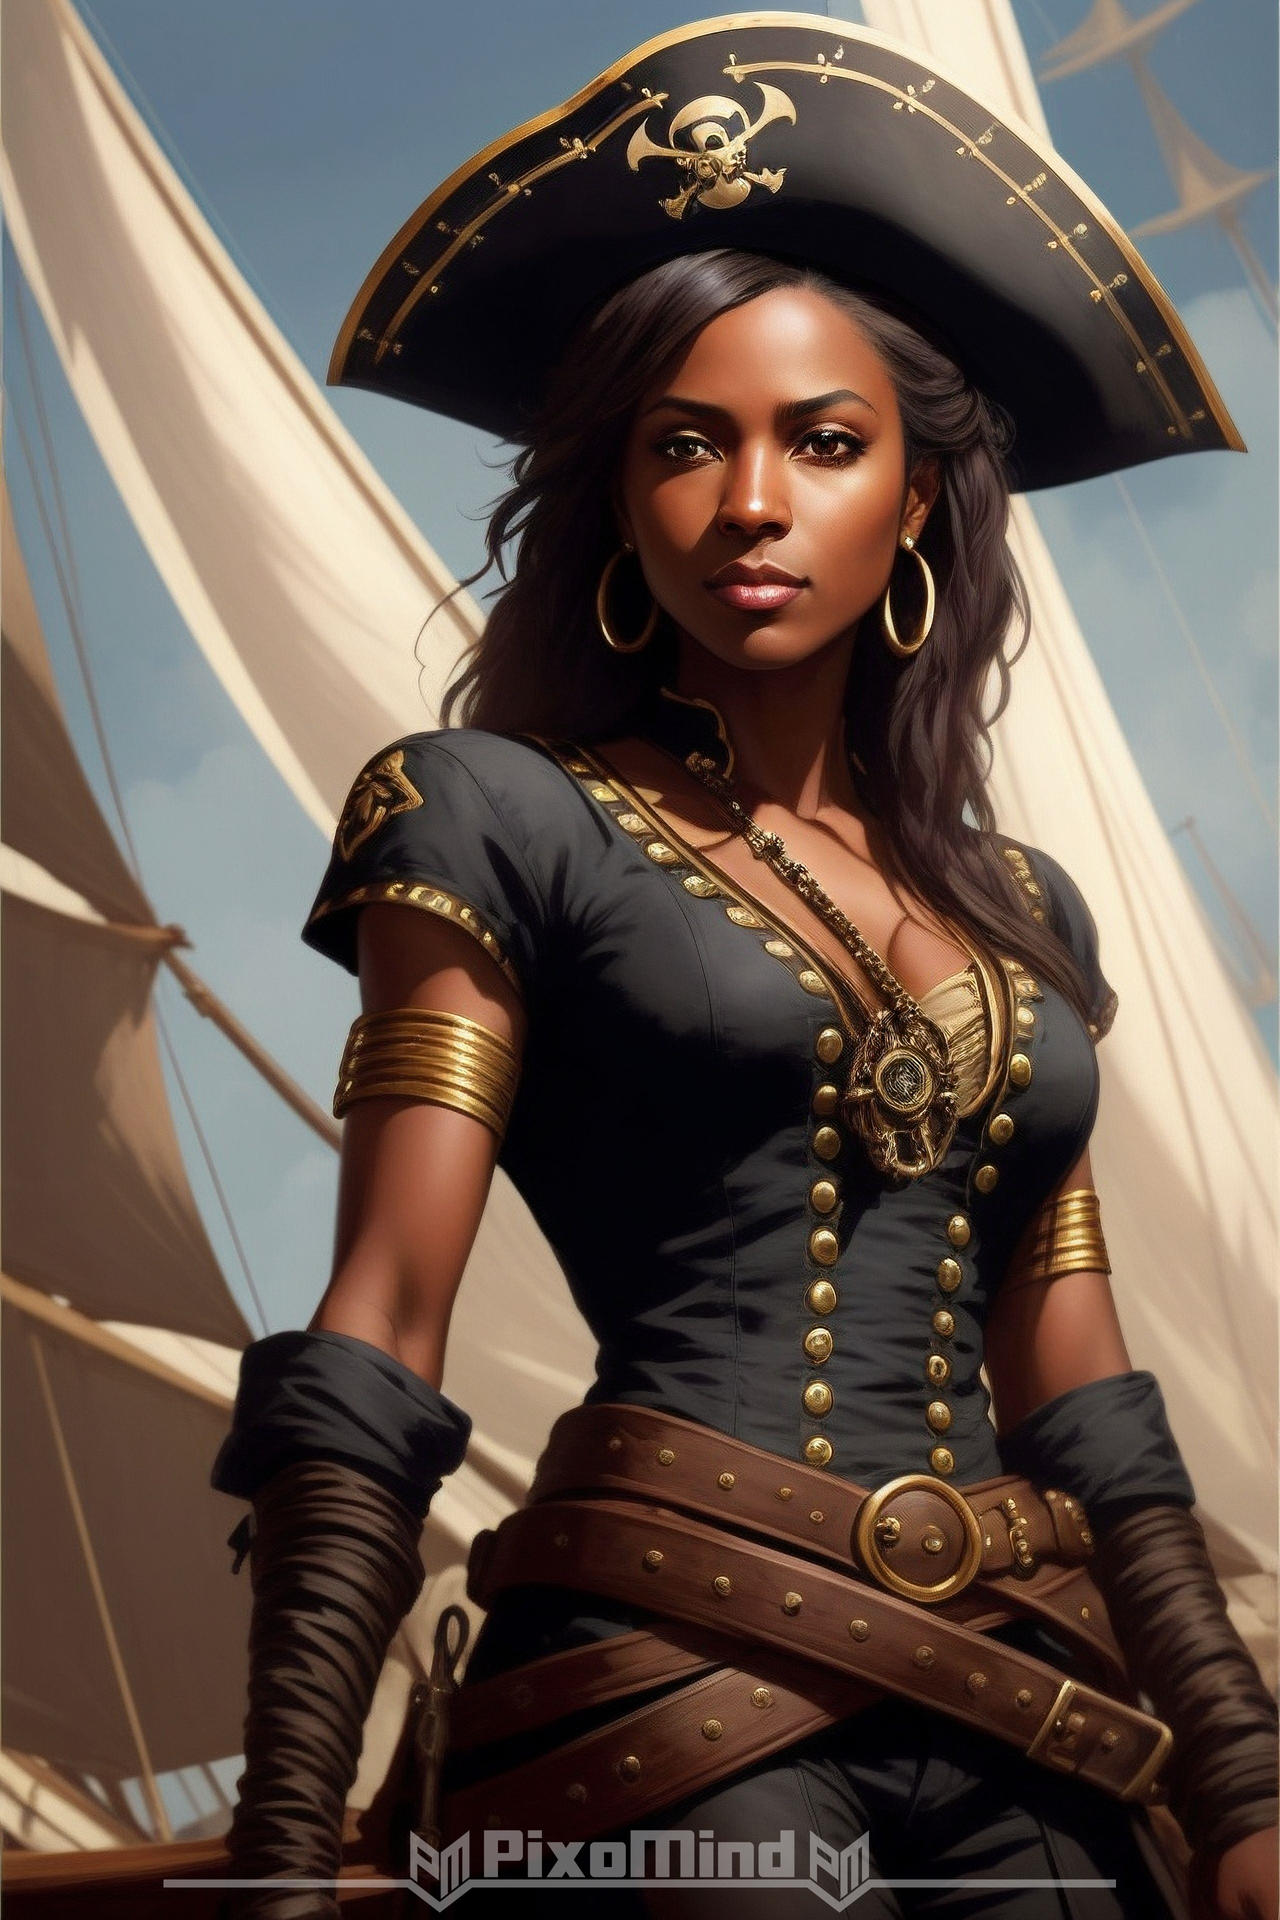 Pirate Girl - 18 by PixoMind on DeviantArt